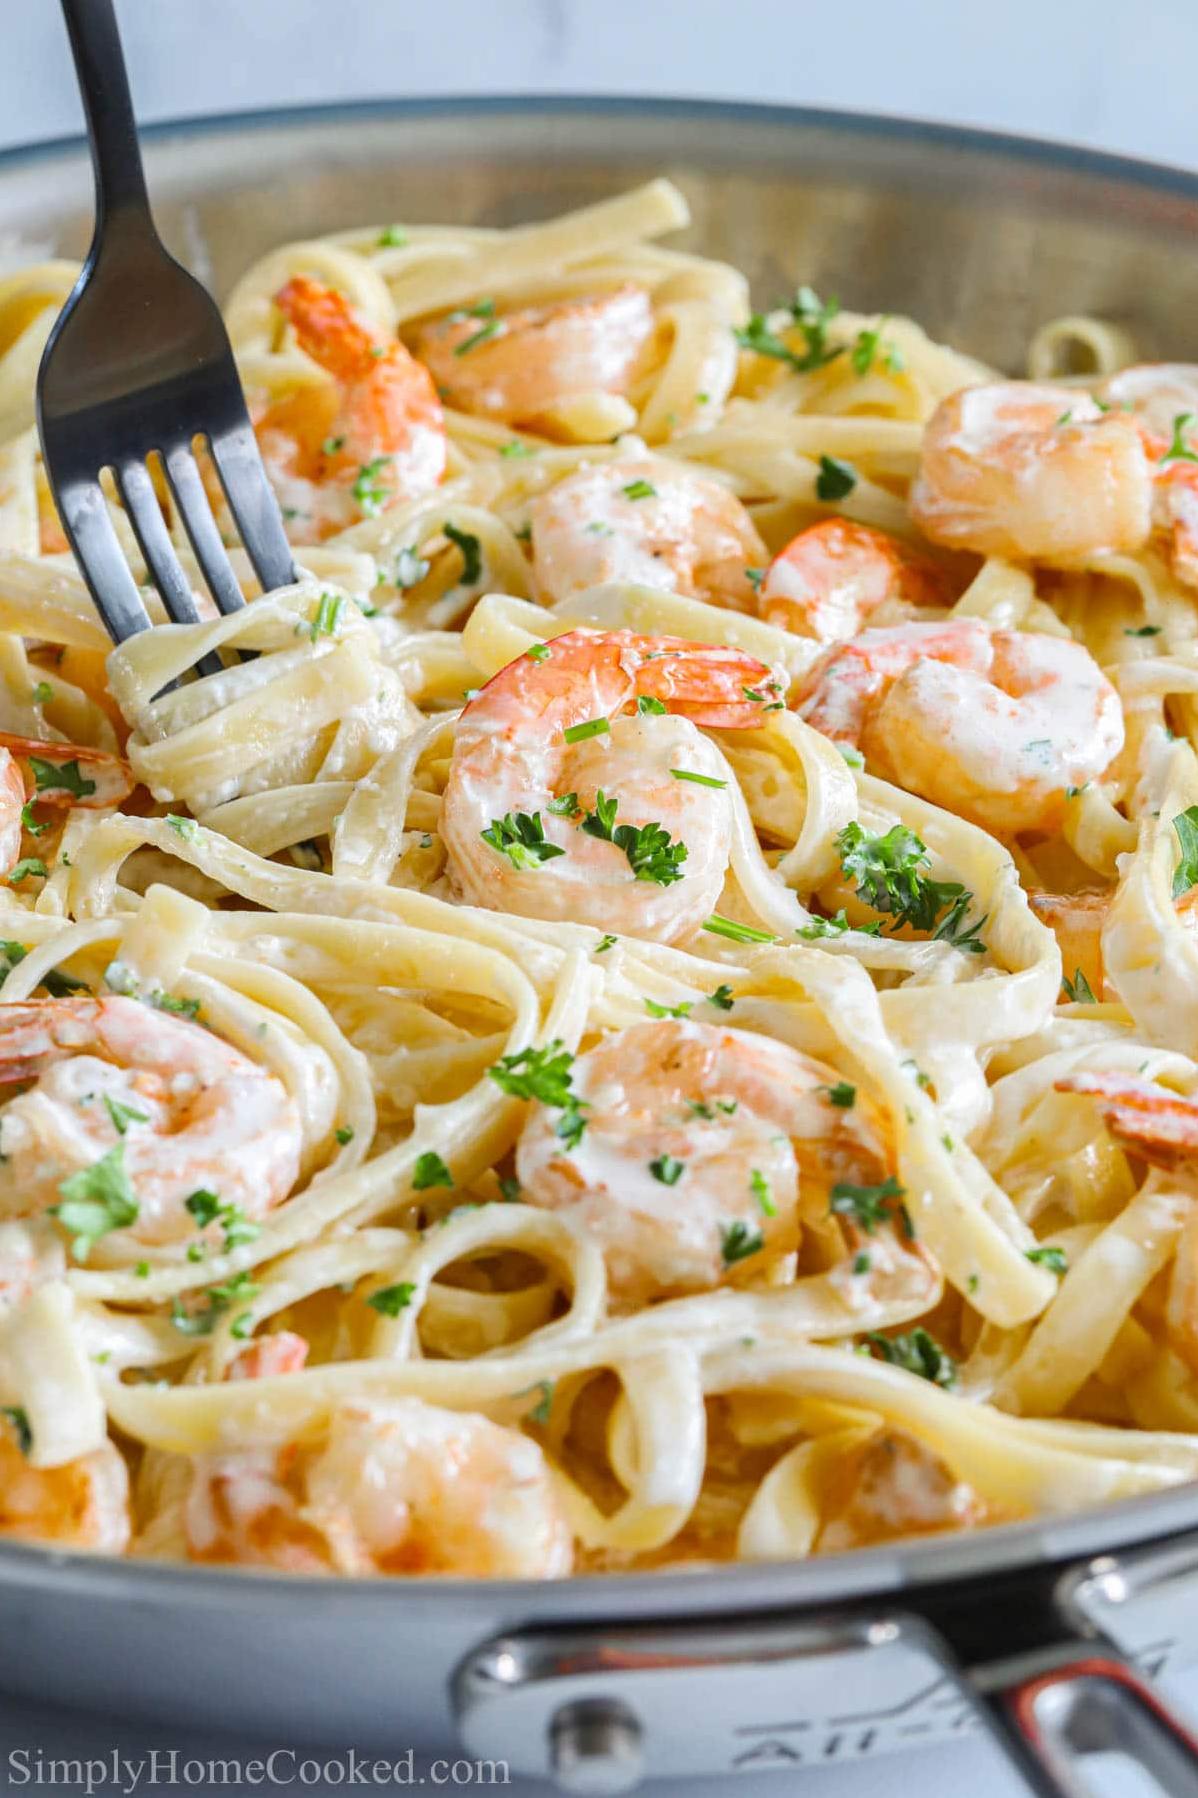  Fresh pasta, tender shrimp, and a creamy sauce? Yes, please!